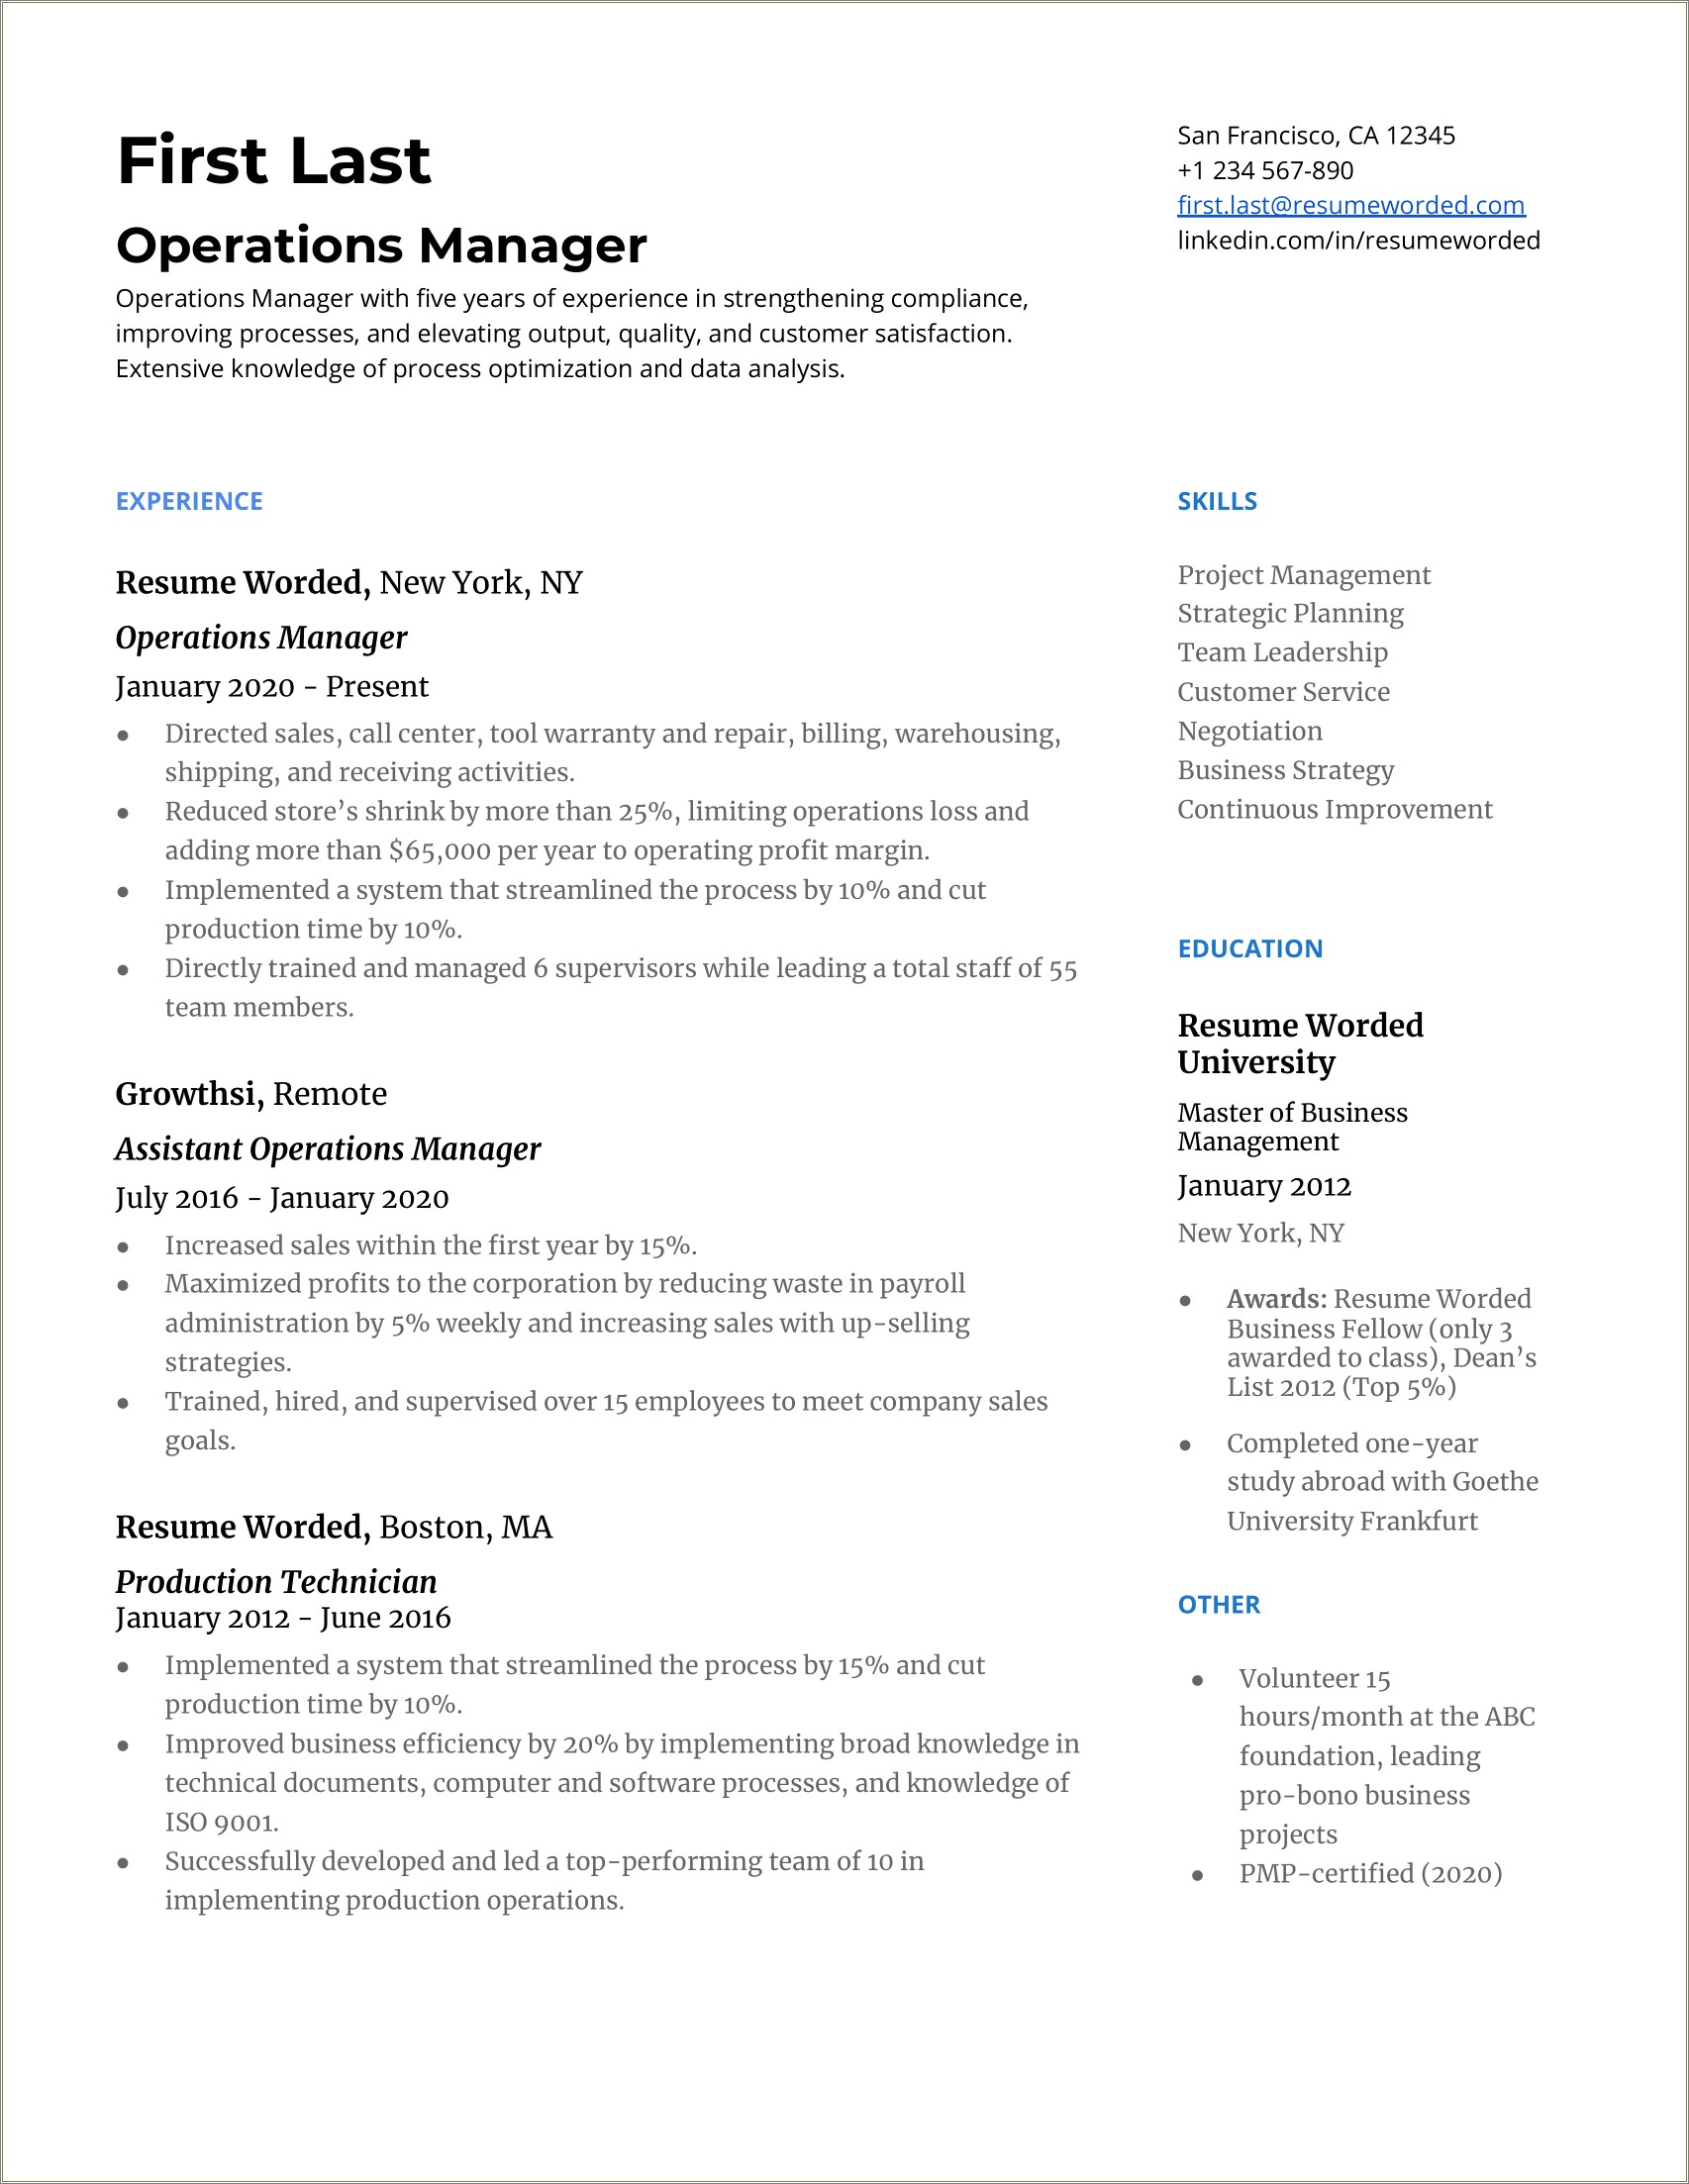 Intellectual Disabilities Residential Group Home Manager Resume